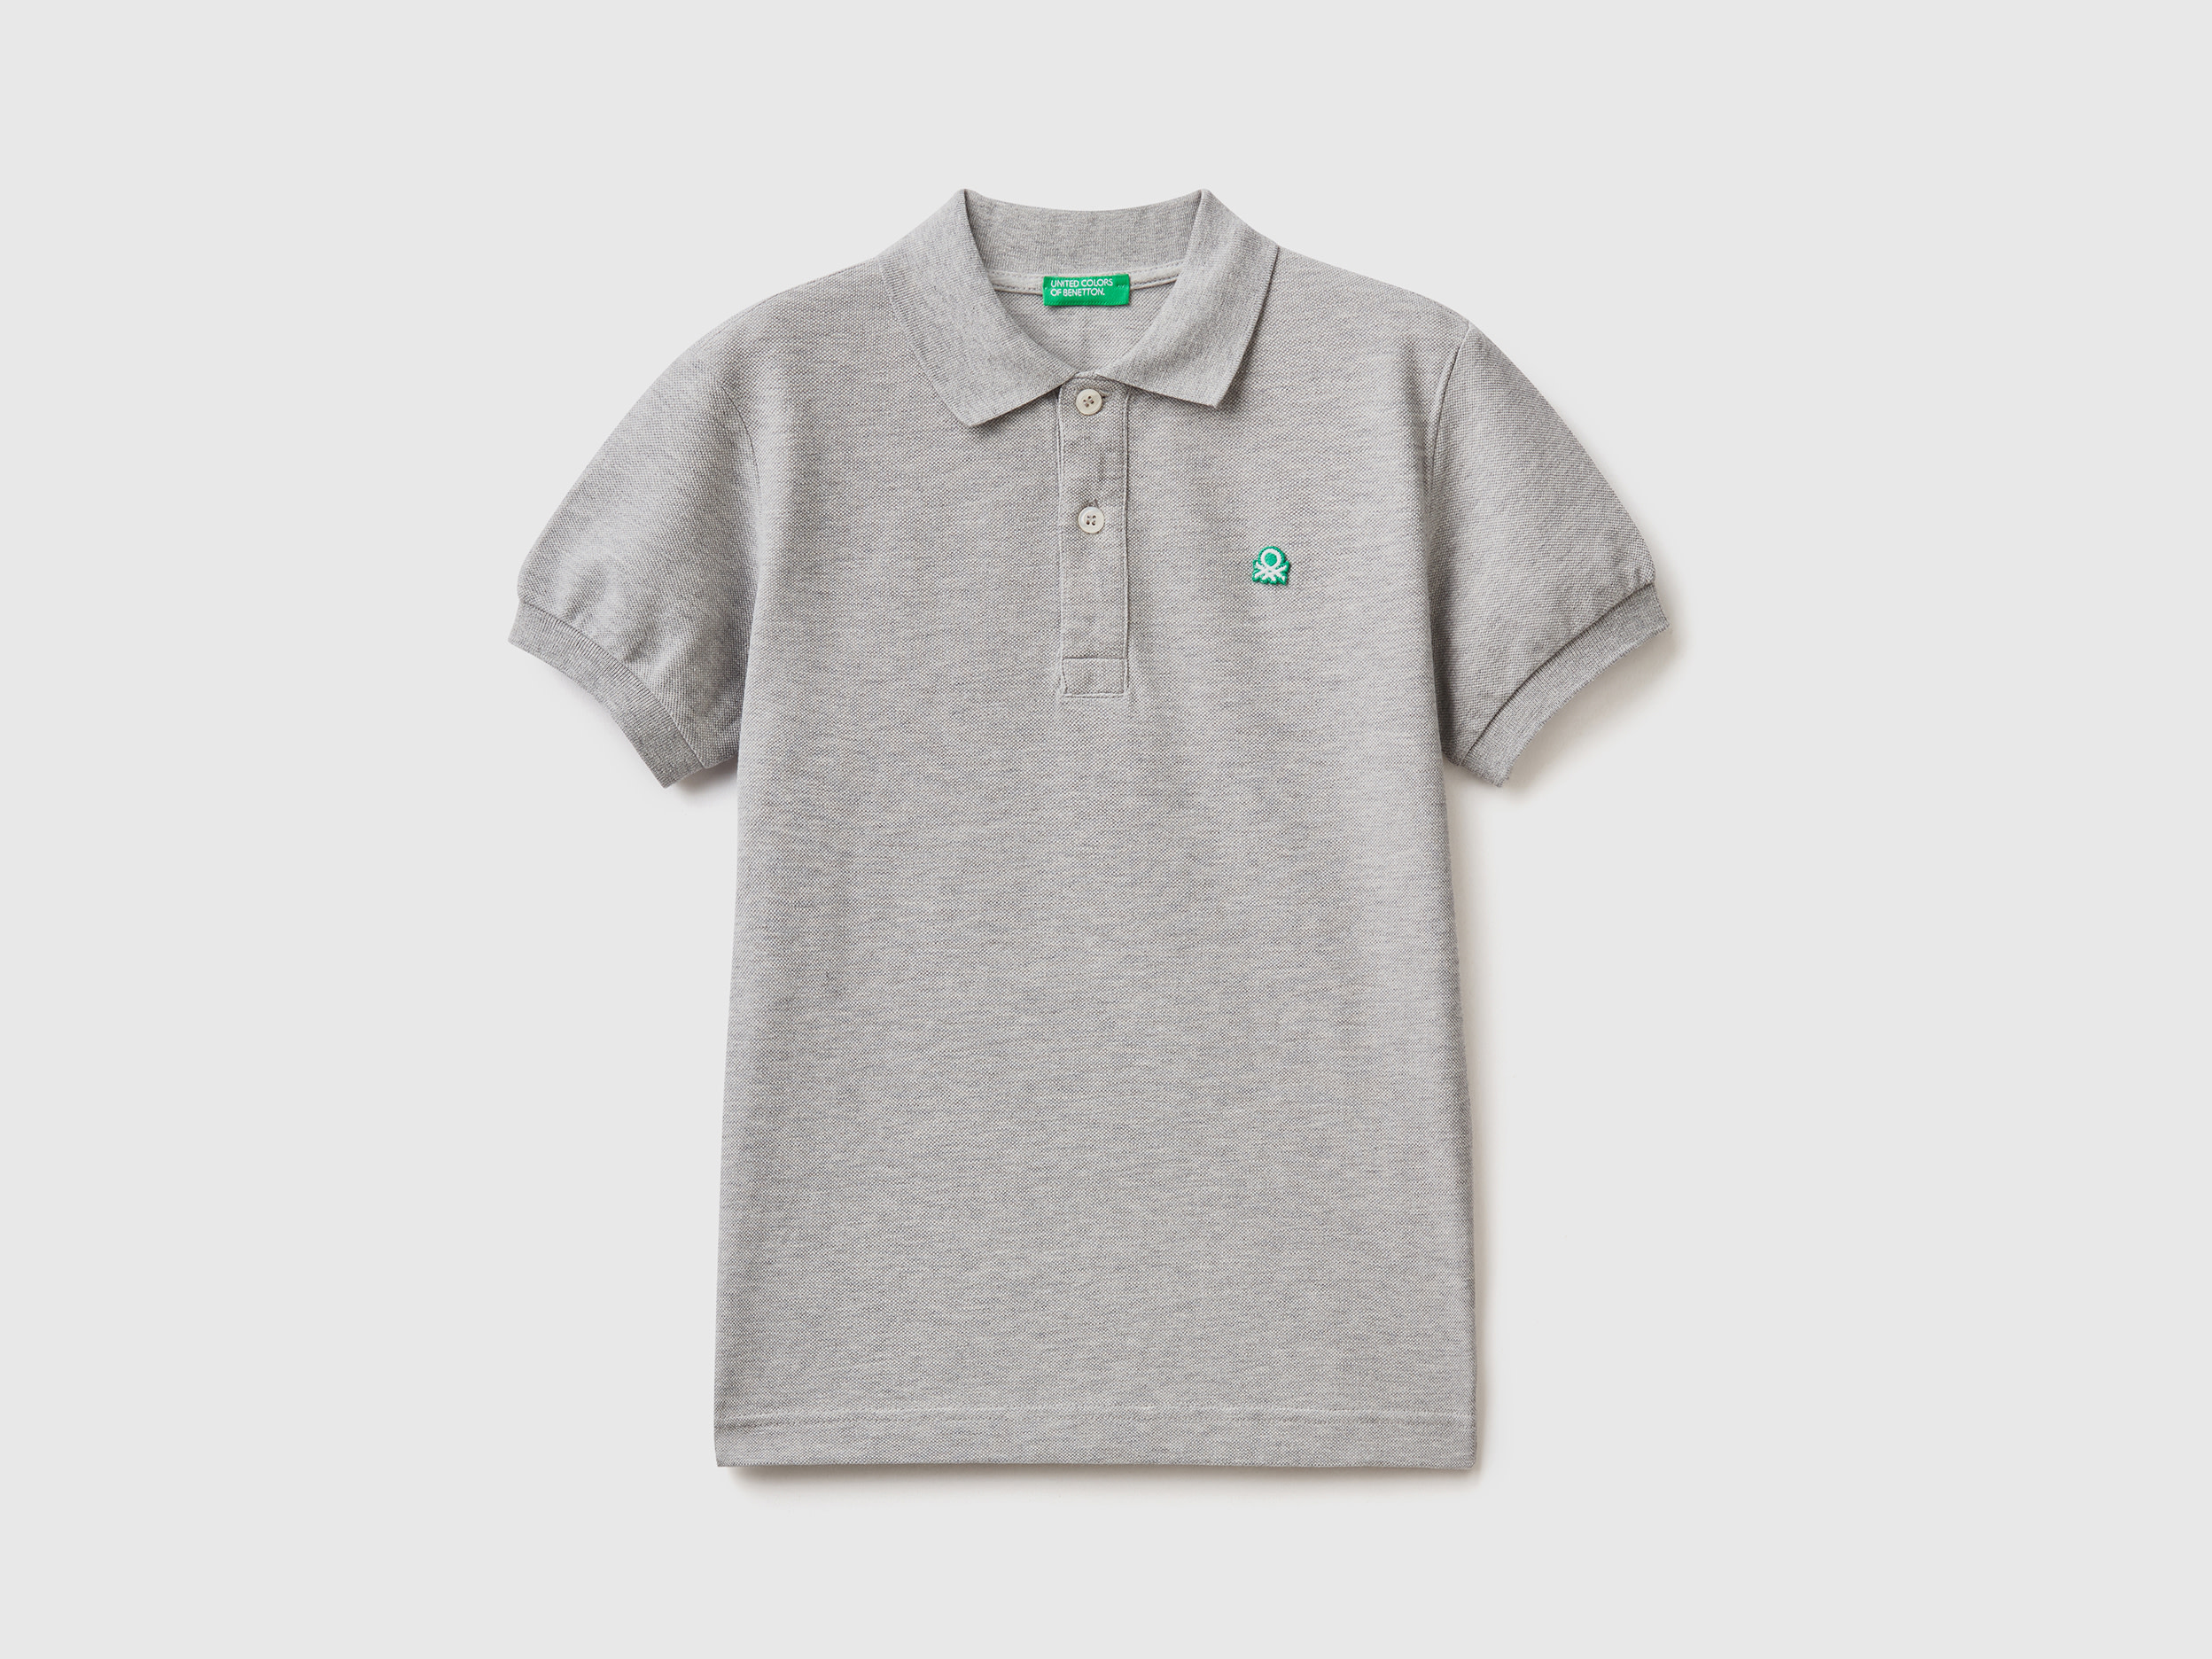 Image of Benetton, Slim Fit Polo In 100% Organic Cotton, size XL, Light Gray, Kids